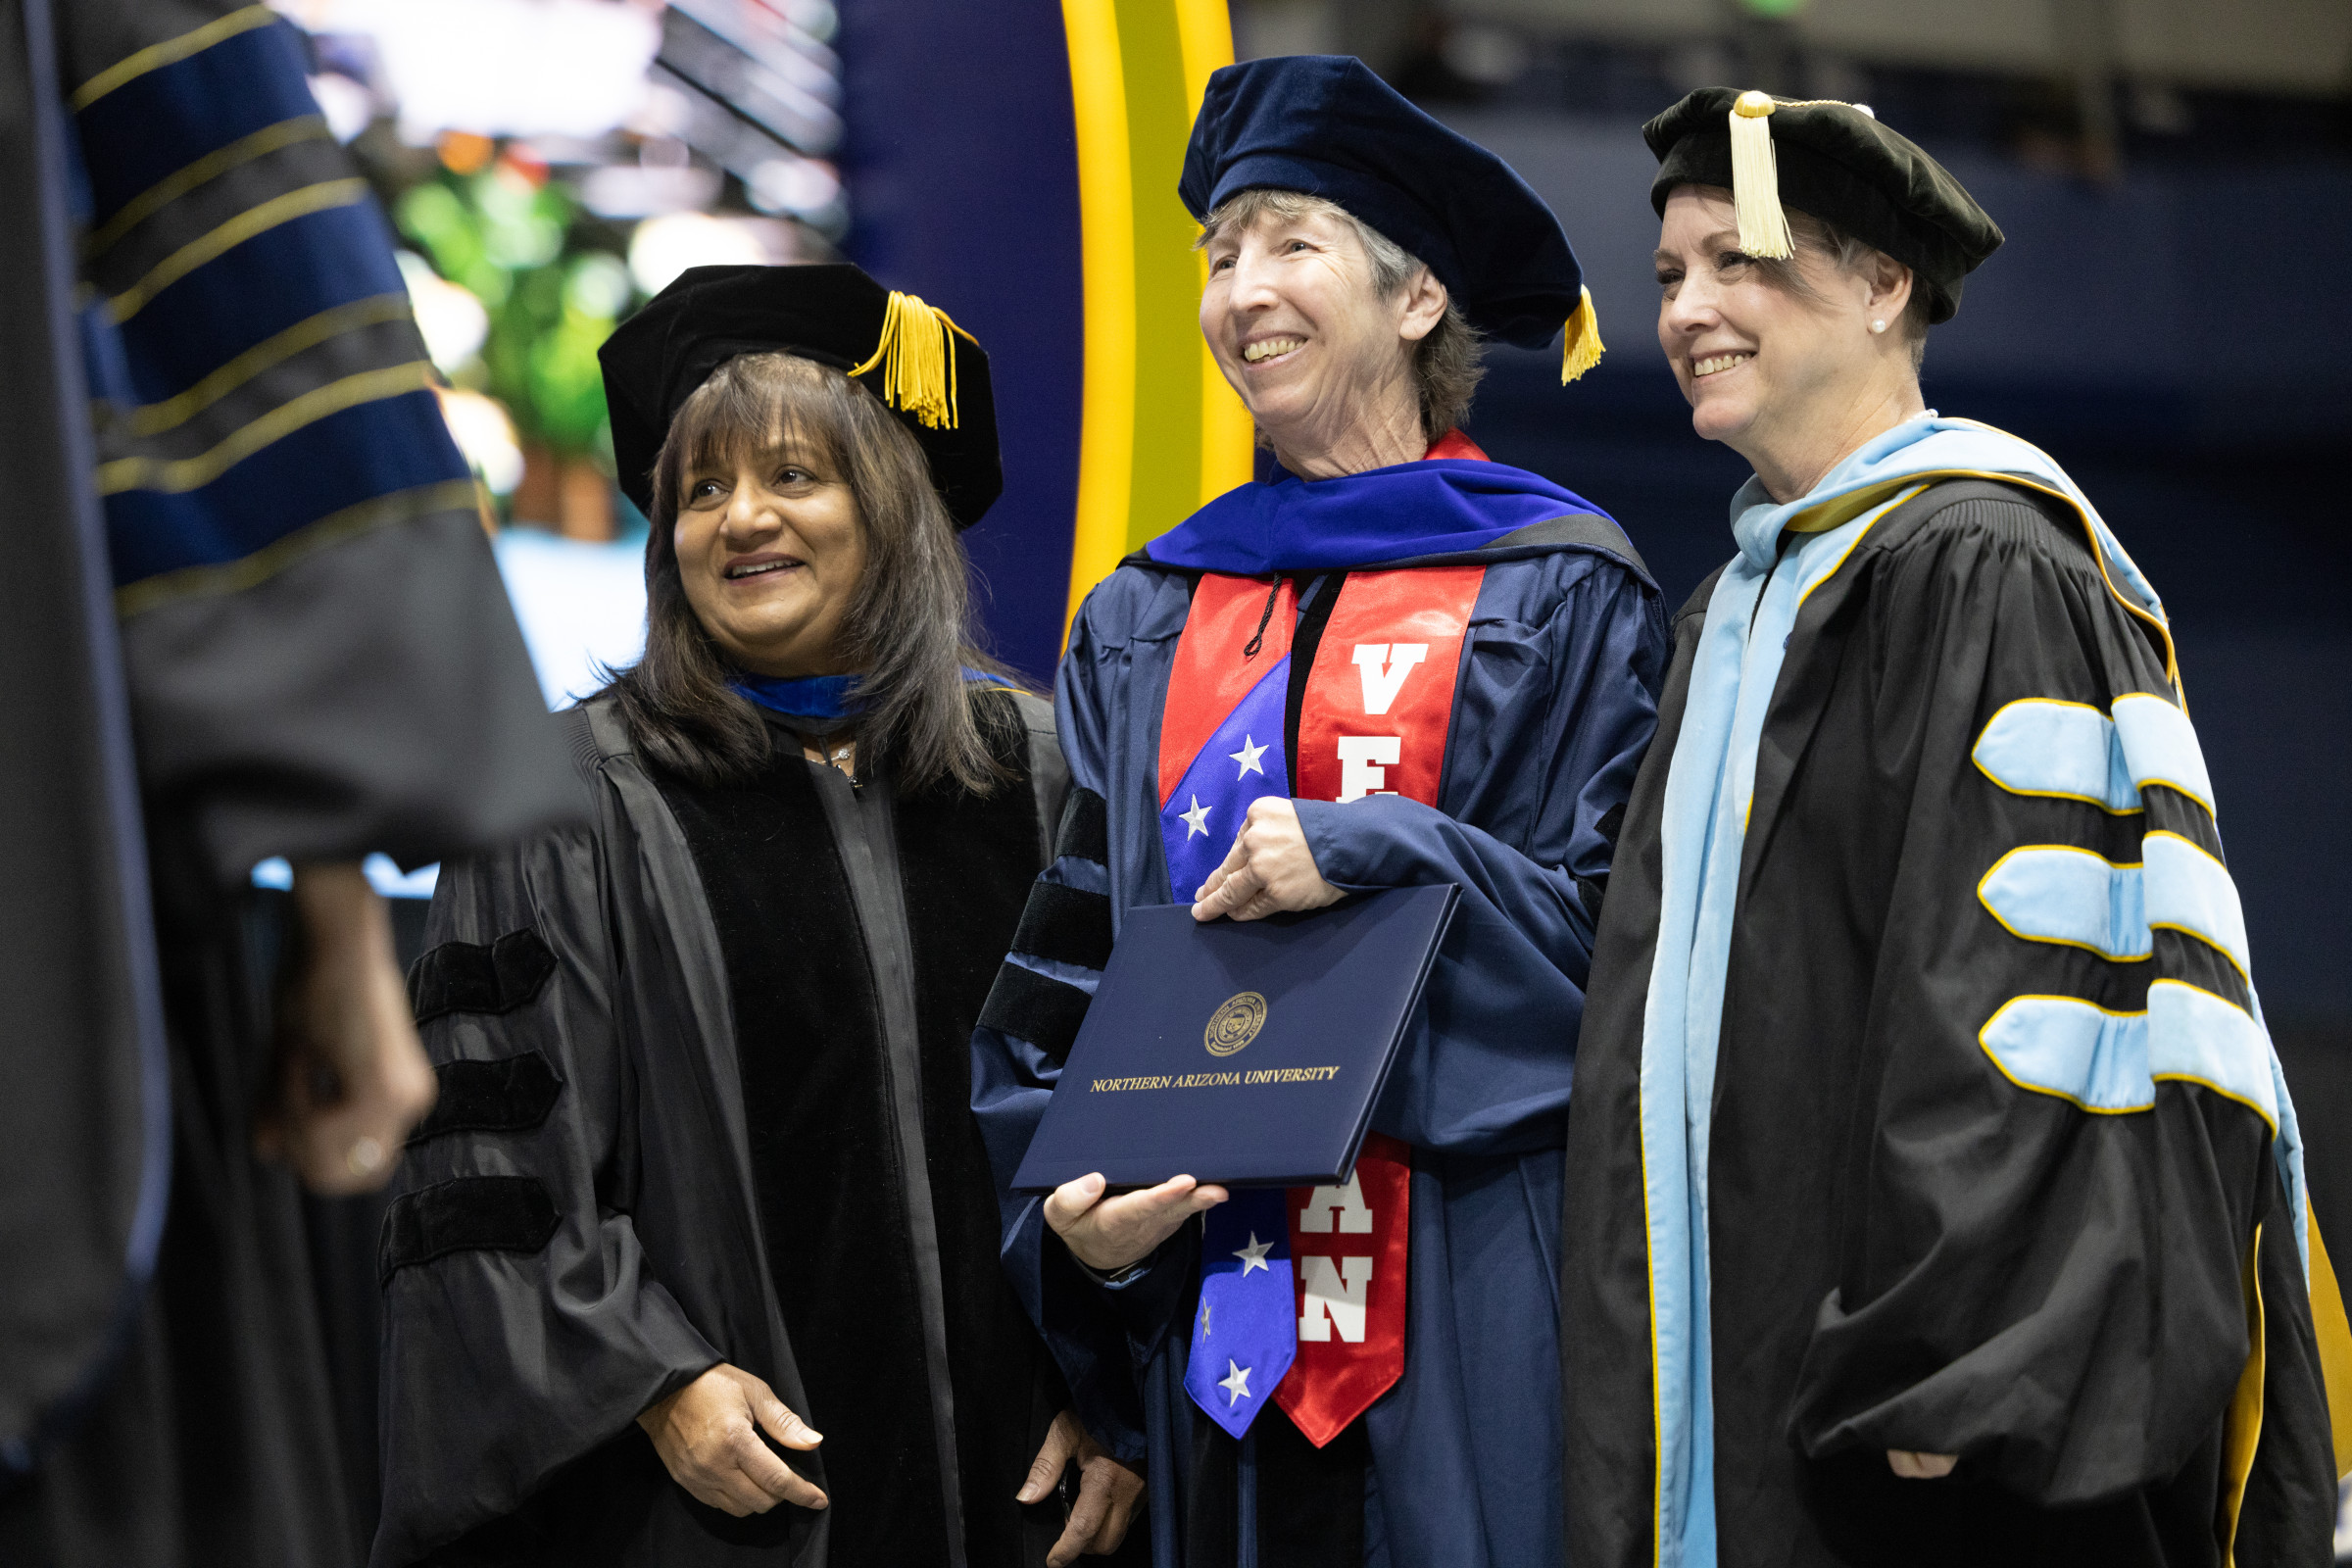 Rebecca Seeger with colleagues at commencement. They are in commencement regalia and Seeger is holding her graduation certificate.